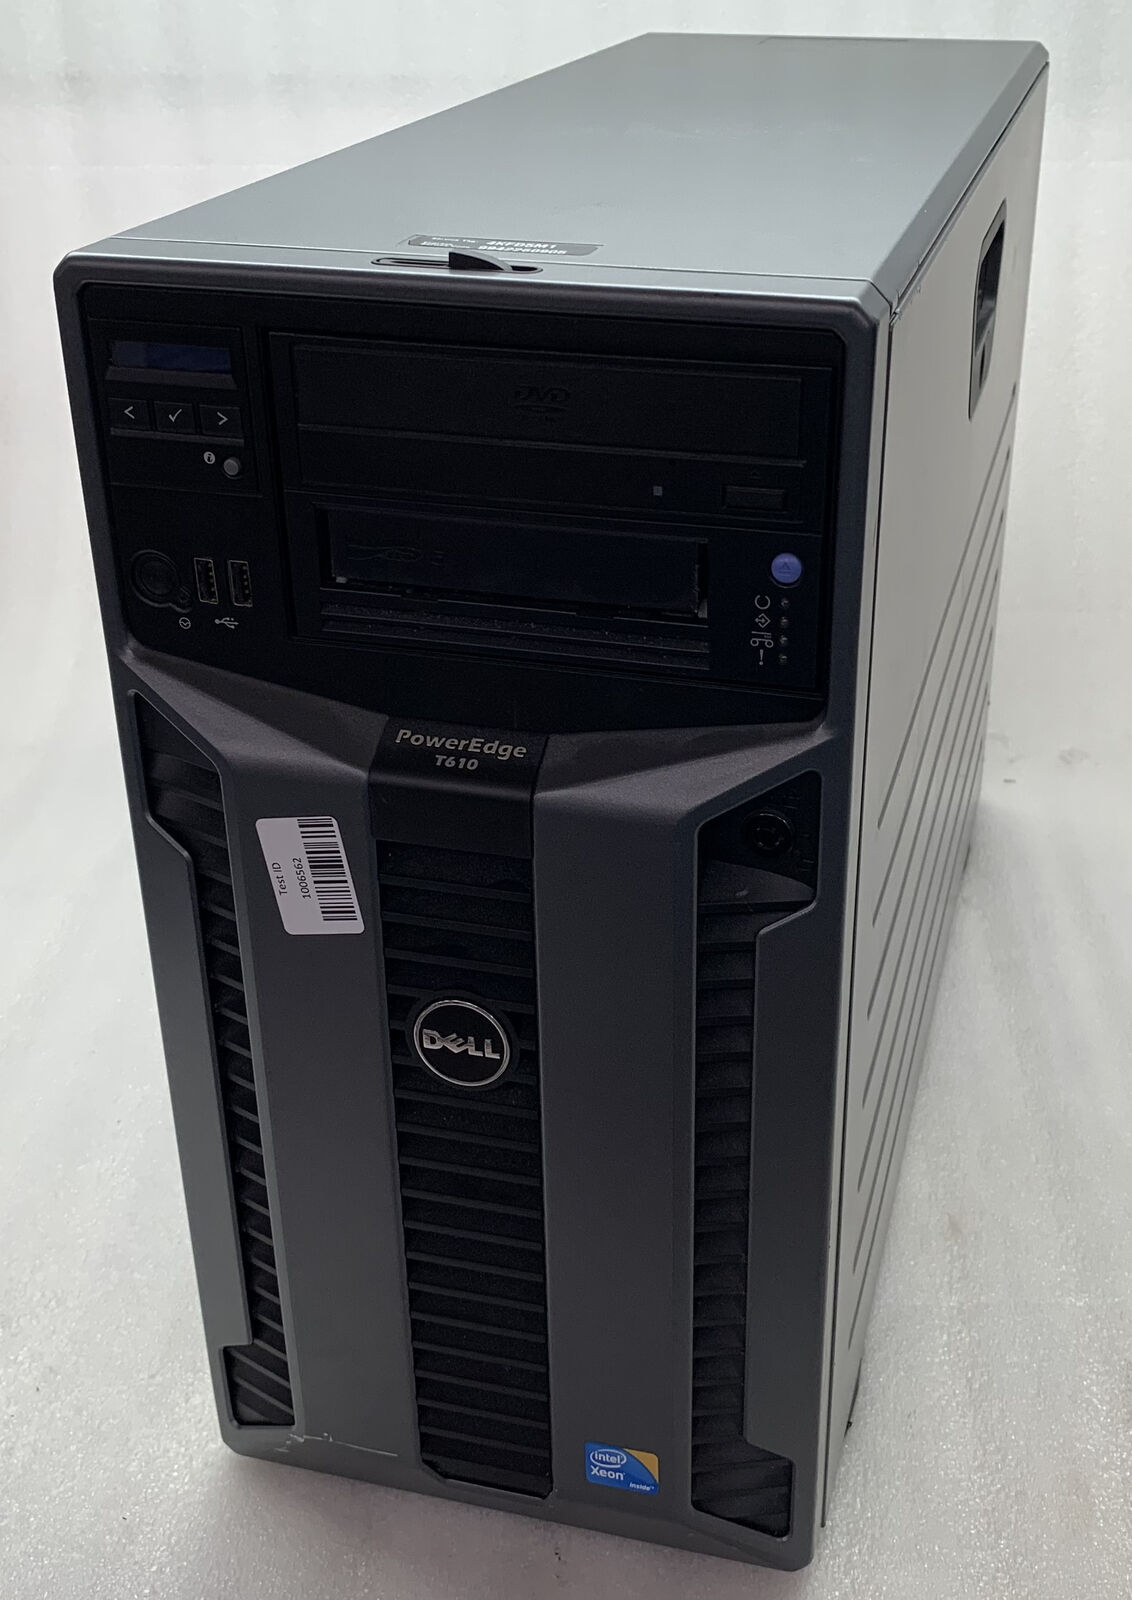 Dell PowerEdge T610 Server BOOTS 2x Xeon E5530 @ 2.40GHz 24GB RAM No HDD